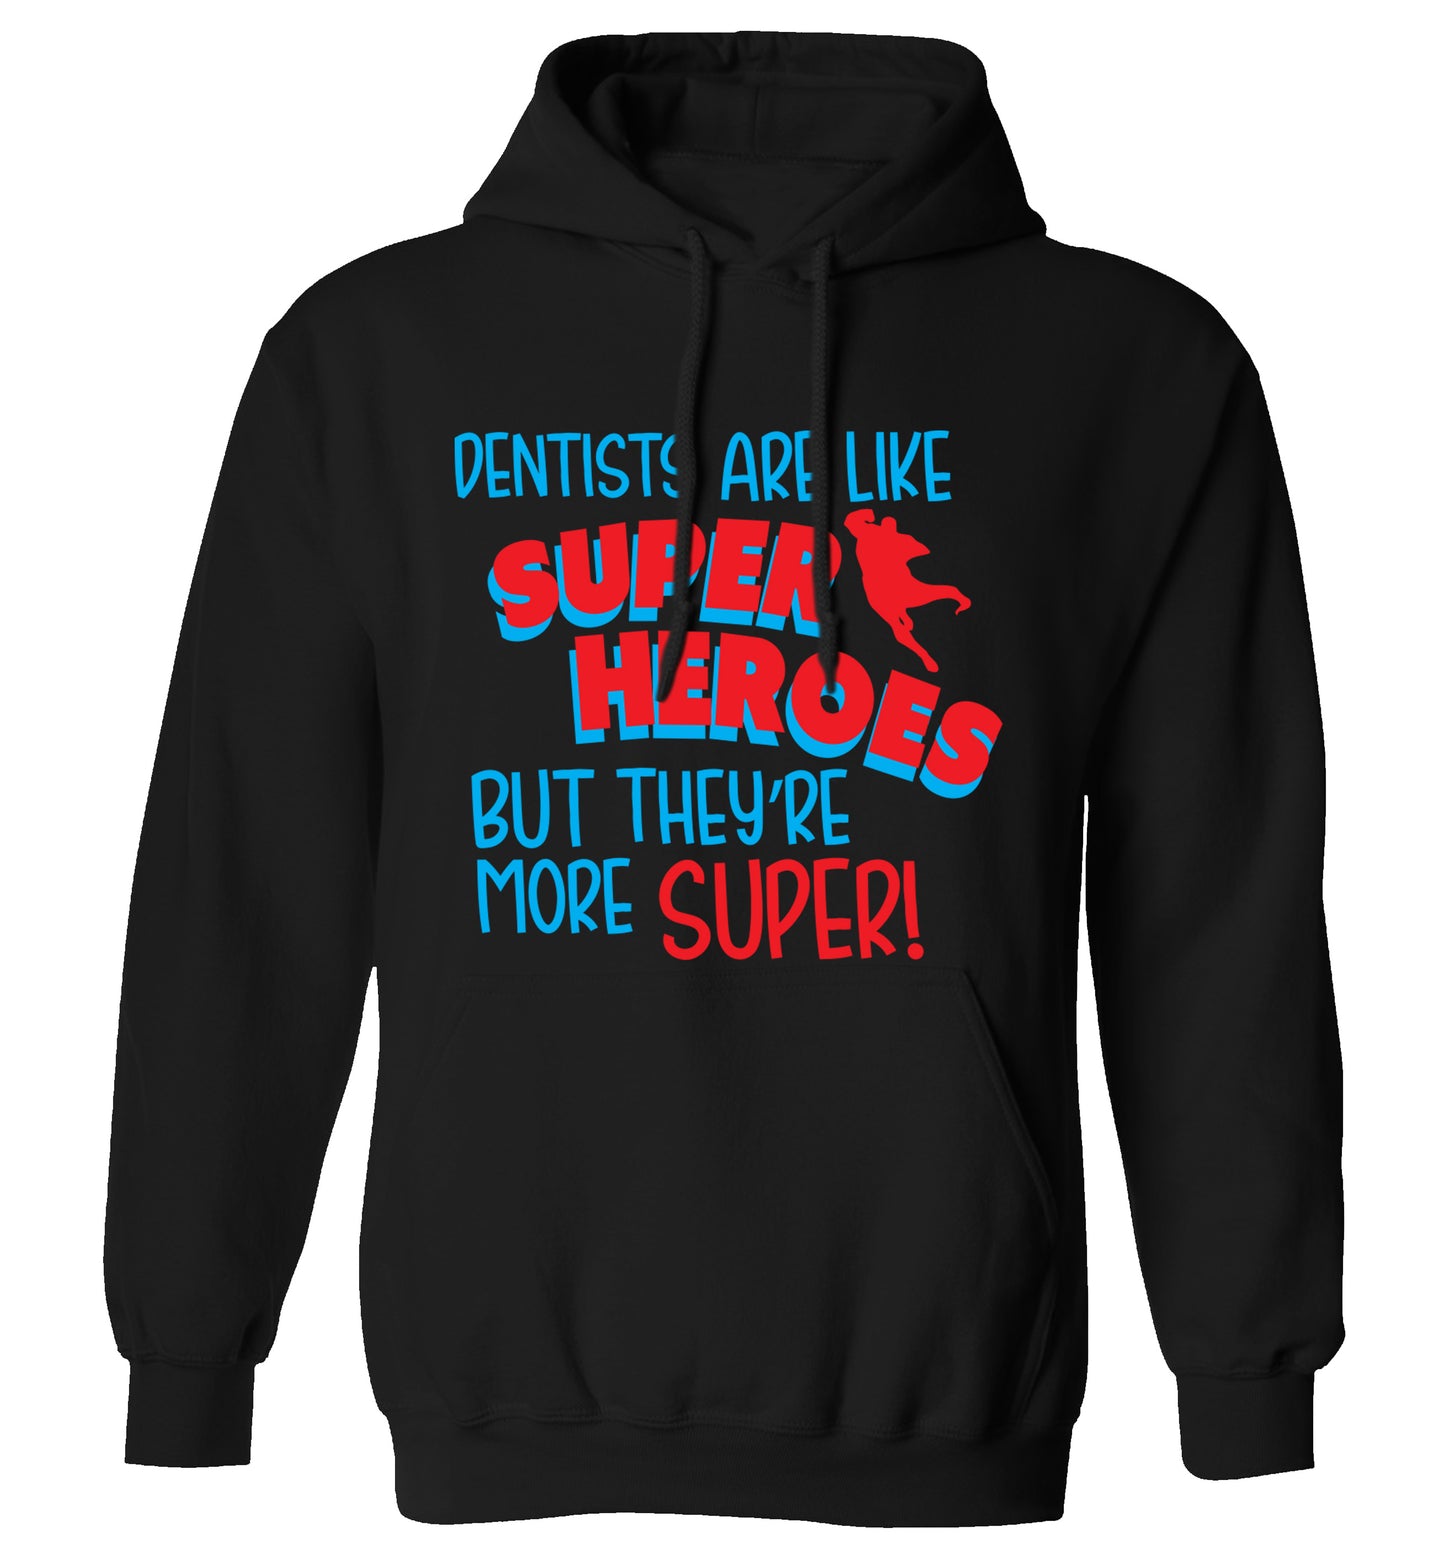 Dentists are like superheros but they're more super adults unisex black hoodie 2XL